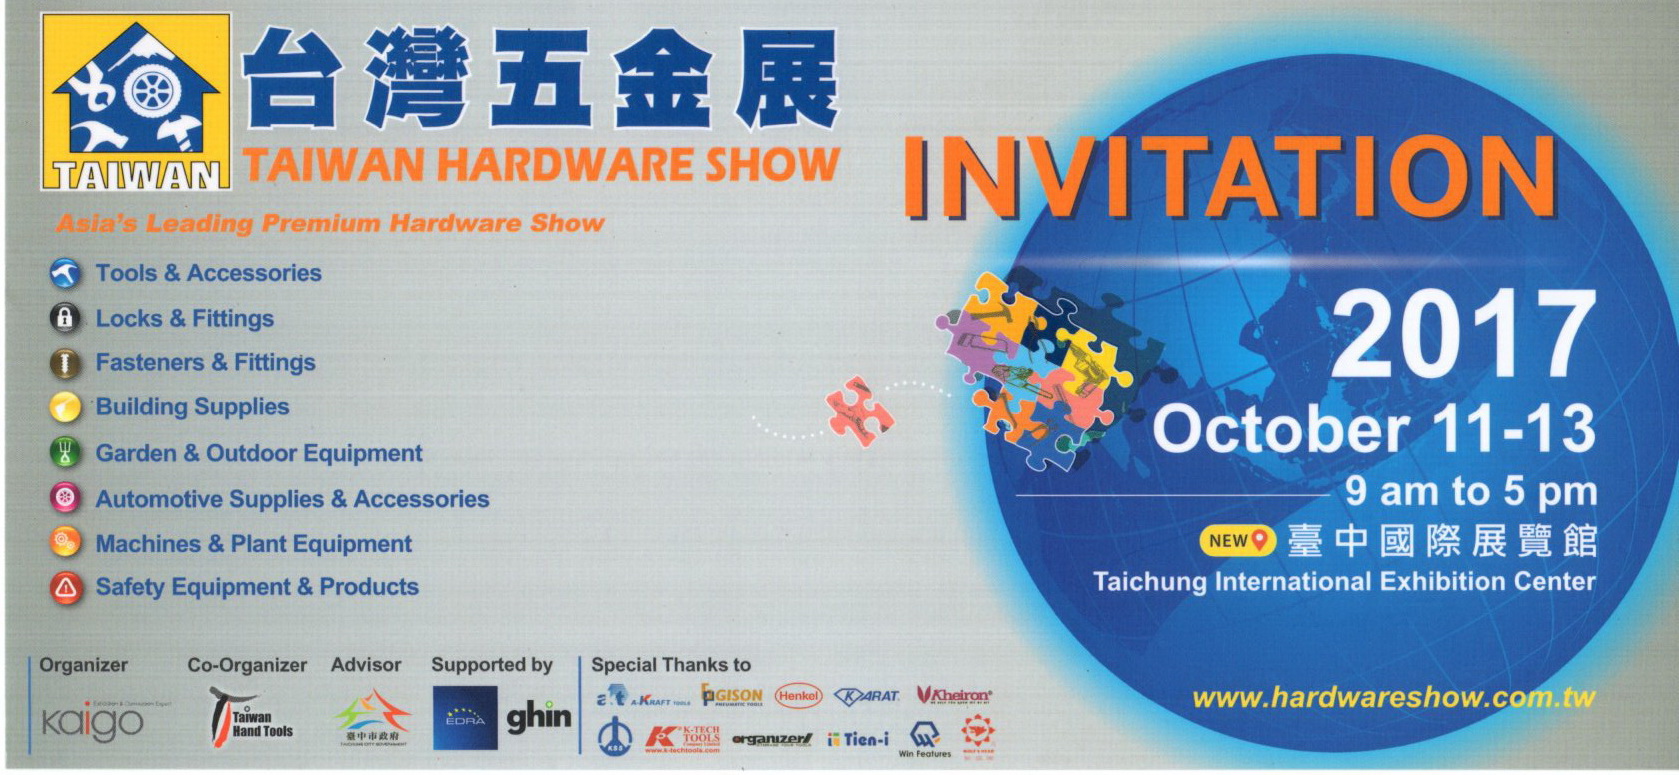 T.G. & Son will attend Taiwan Hardware Show 2017